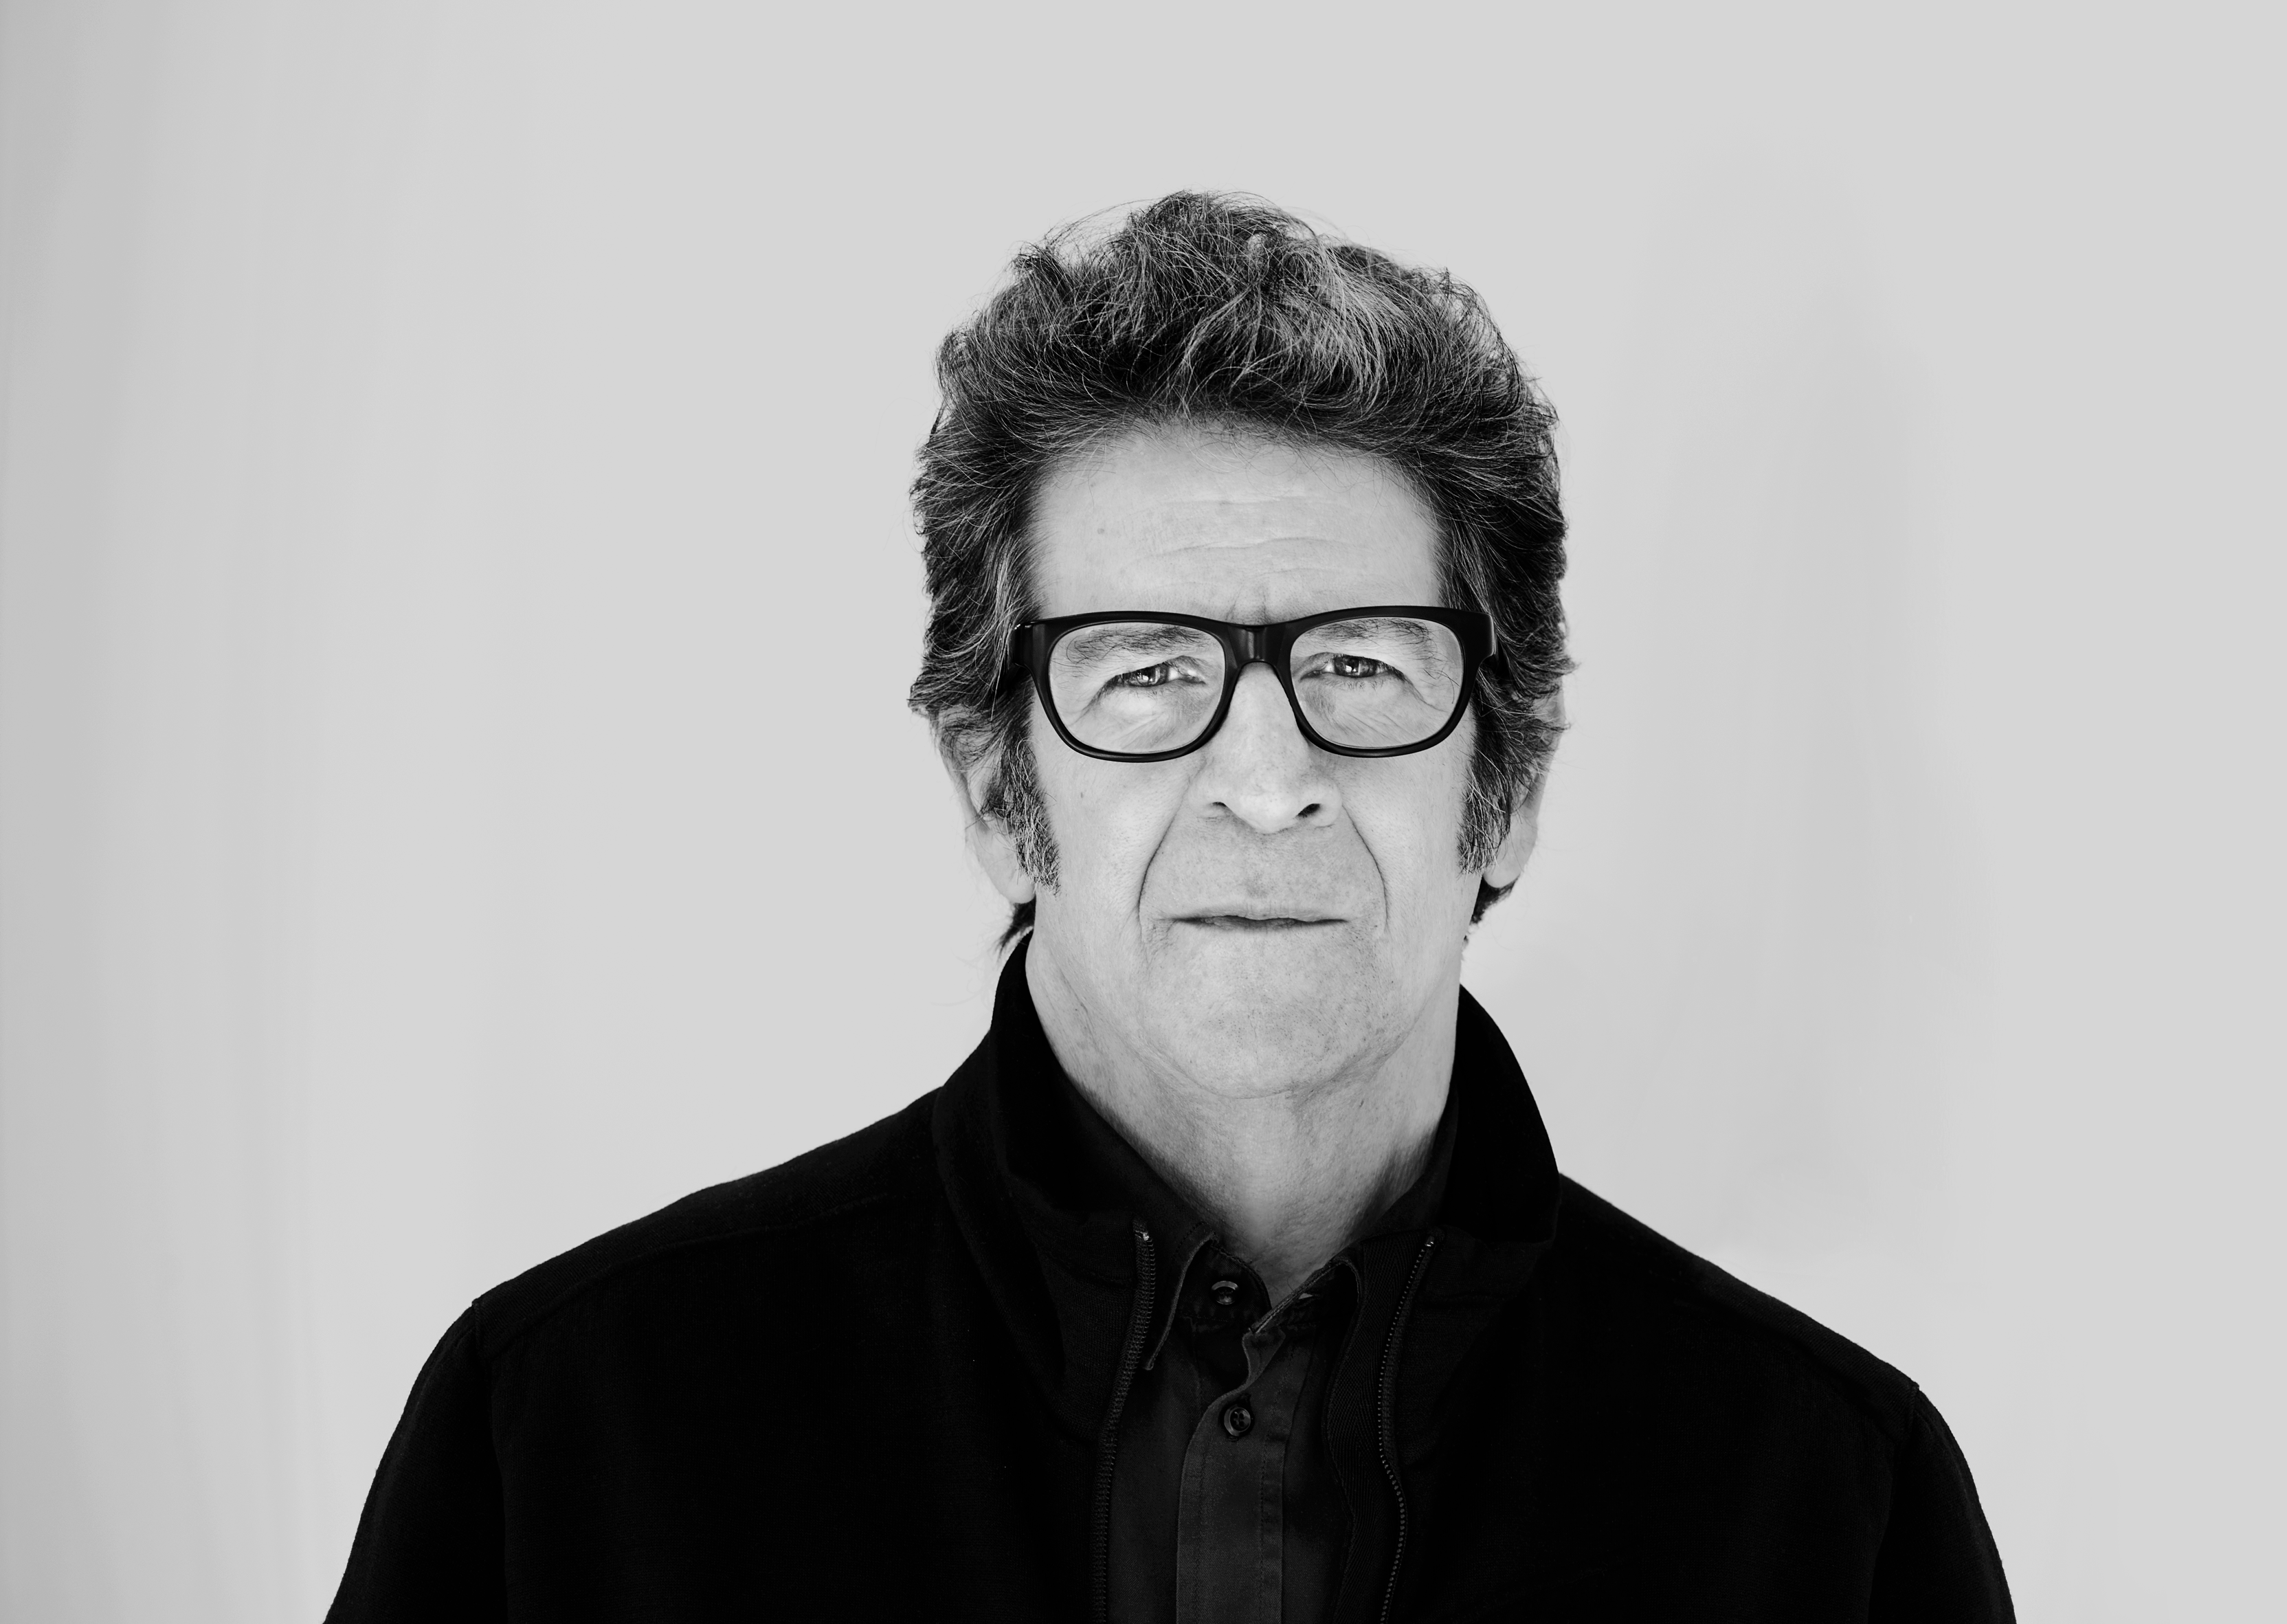 Black and white portrait of Robert standing against a plain wall. He has a serious look on his face, is wearing glasses and  a jacket over a button up shirt. 